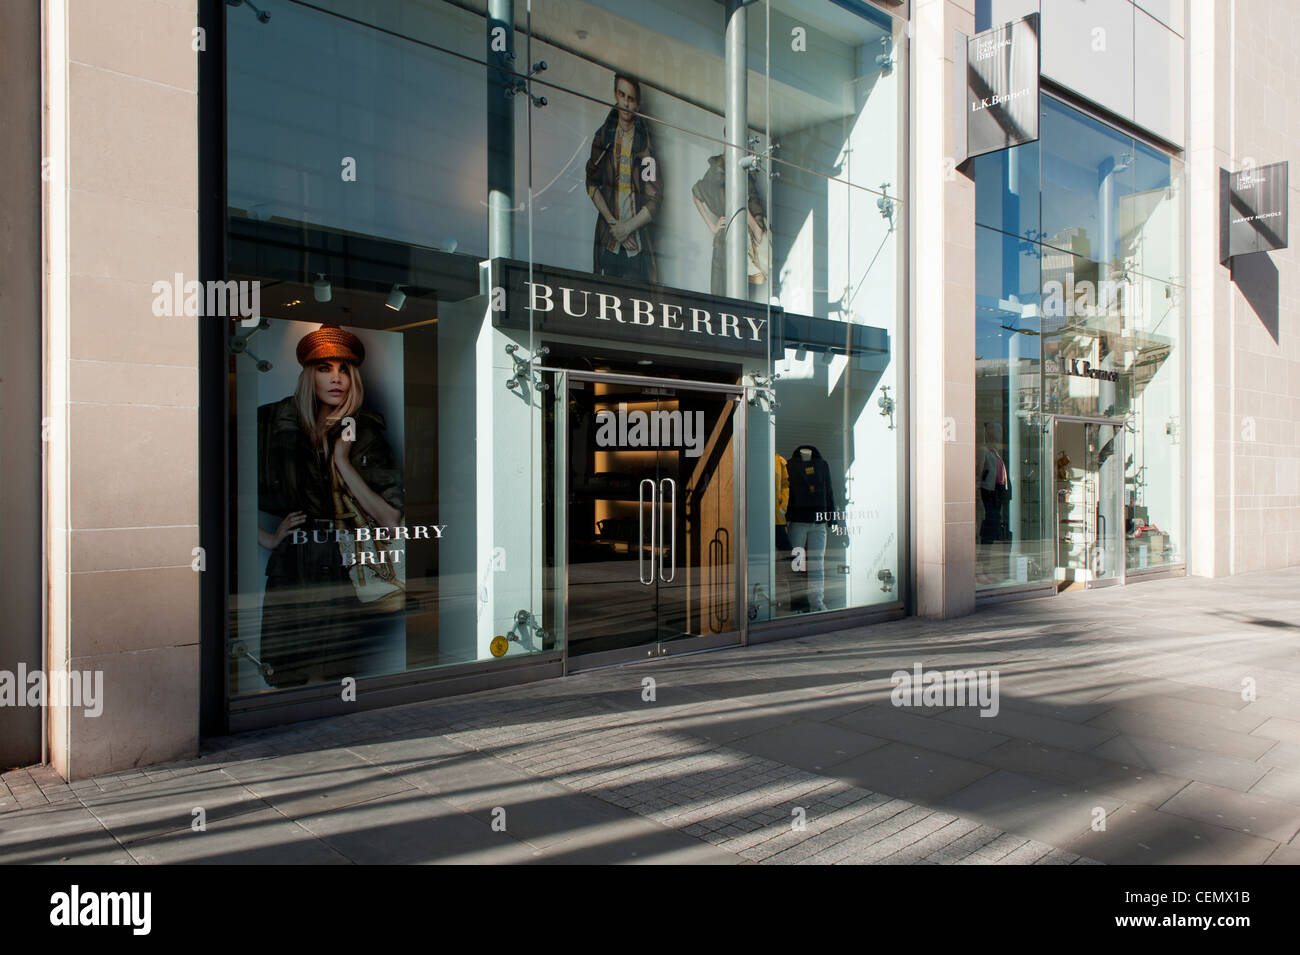 The Burberry clothing shop located on New Cathedral Street in Manchester city centre, UK (Editorial use only). Stock Photo